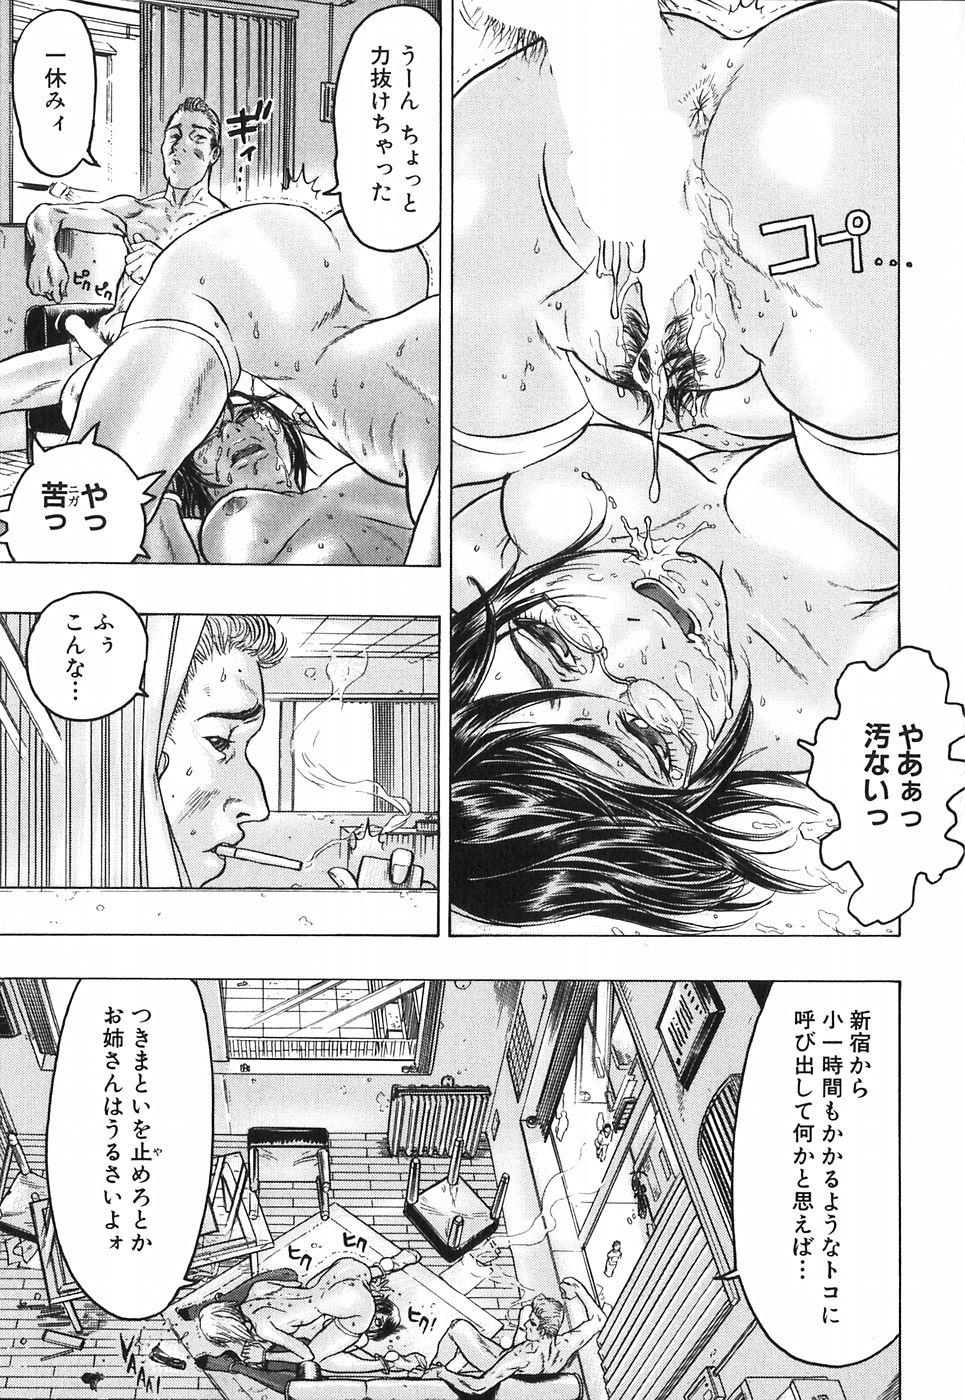 Submissive Akai Fuku no Onna - The Woman with Red Dress Mulata - Page 9